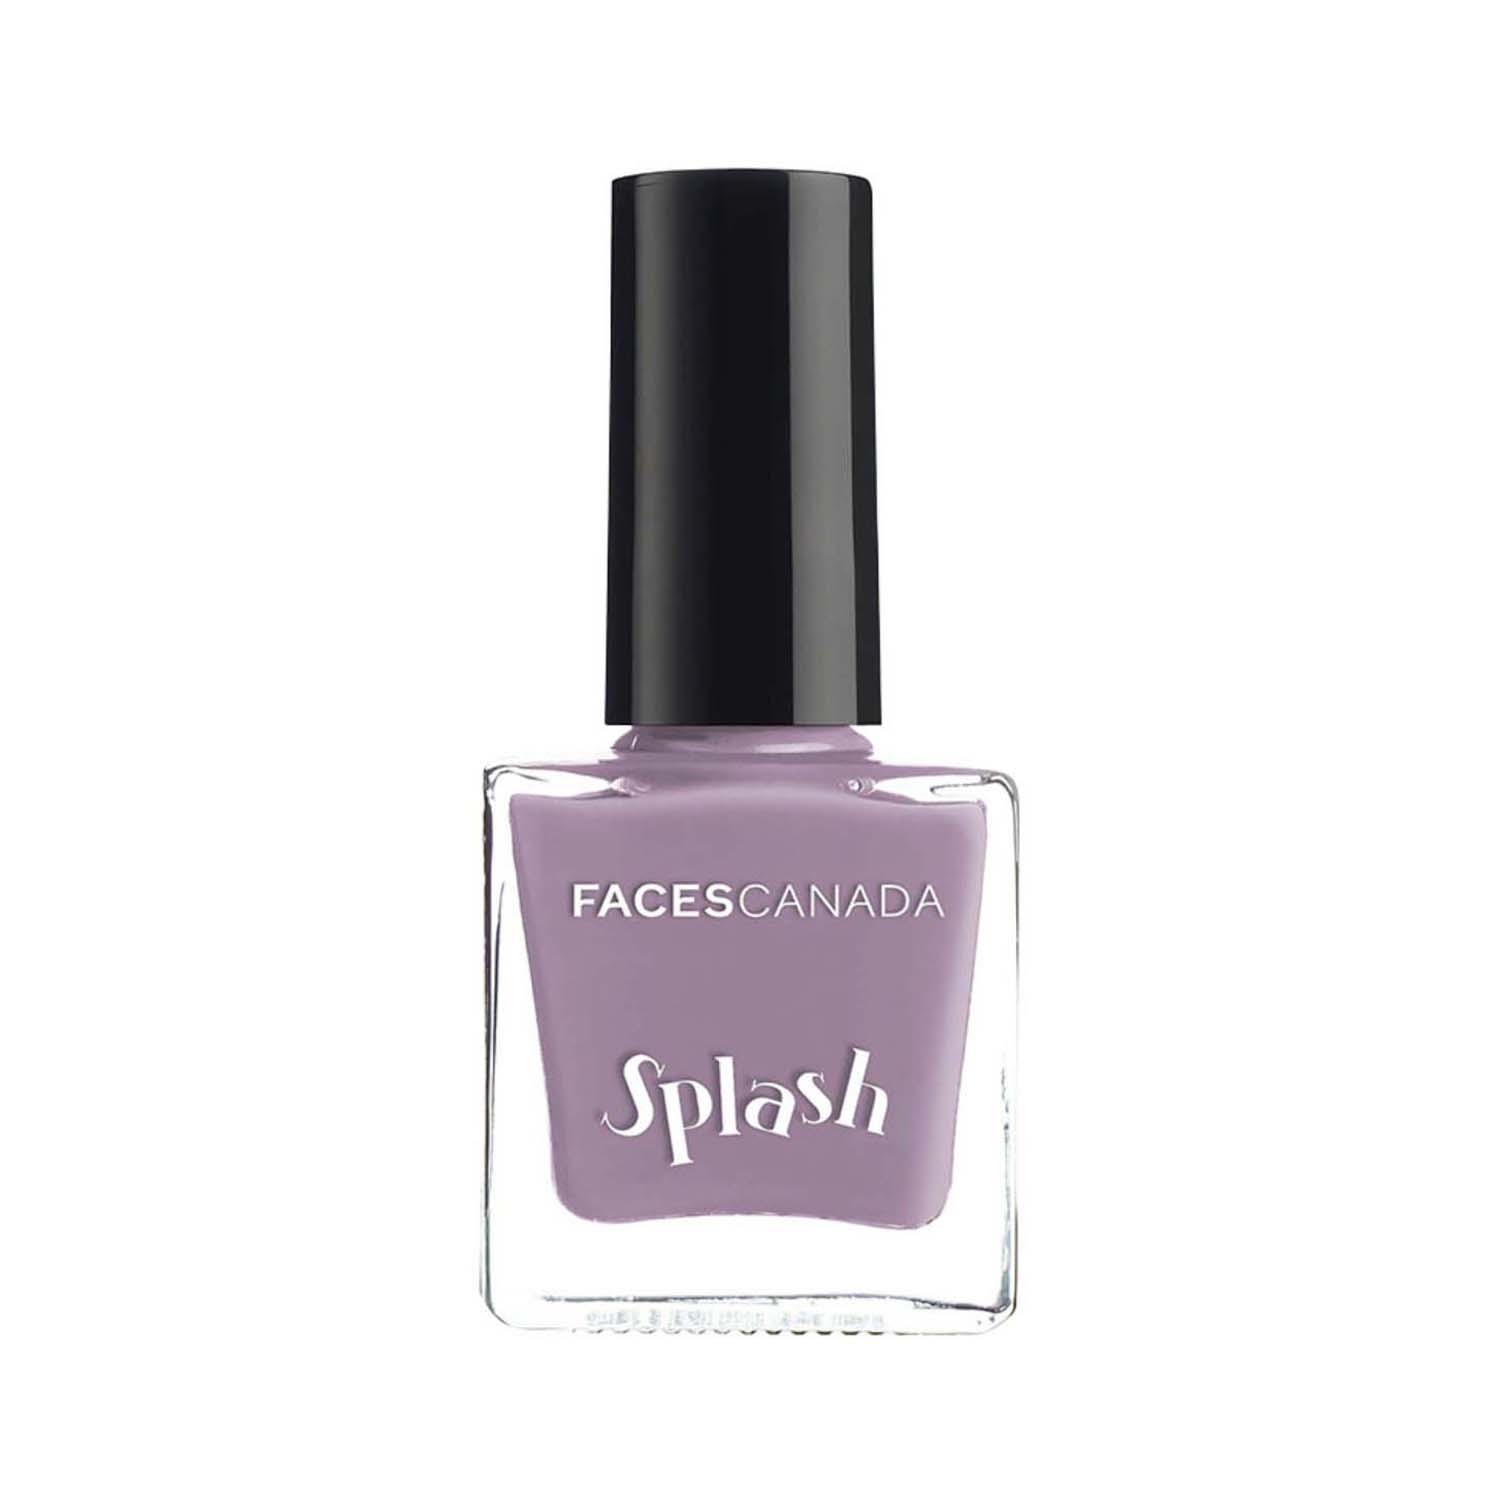 FACES CANADA Ultime Pro Splash Luxe Nail Enamel Keeping Basic 12 ml Online  in India, Buy at Best Price from Firstcry.com - 14409244